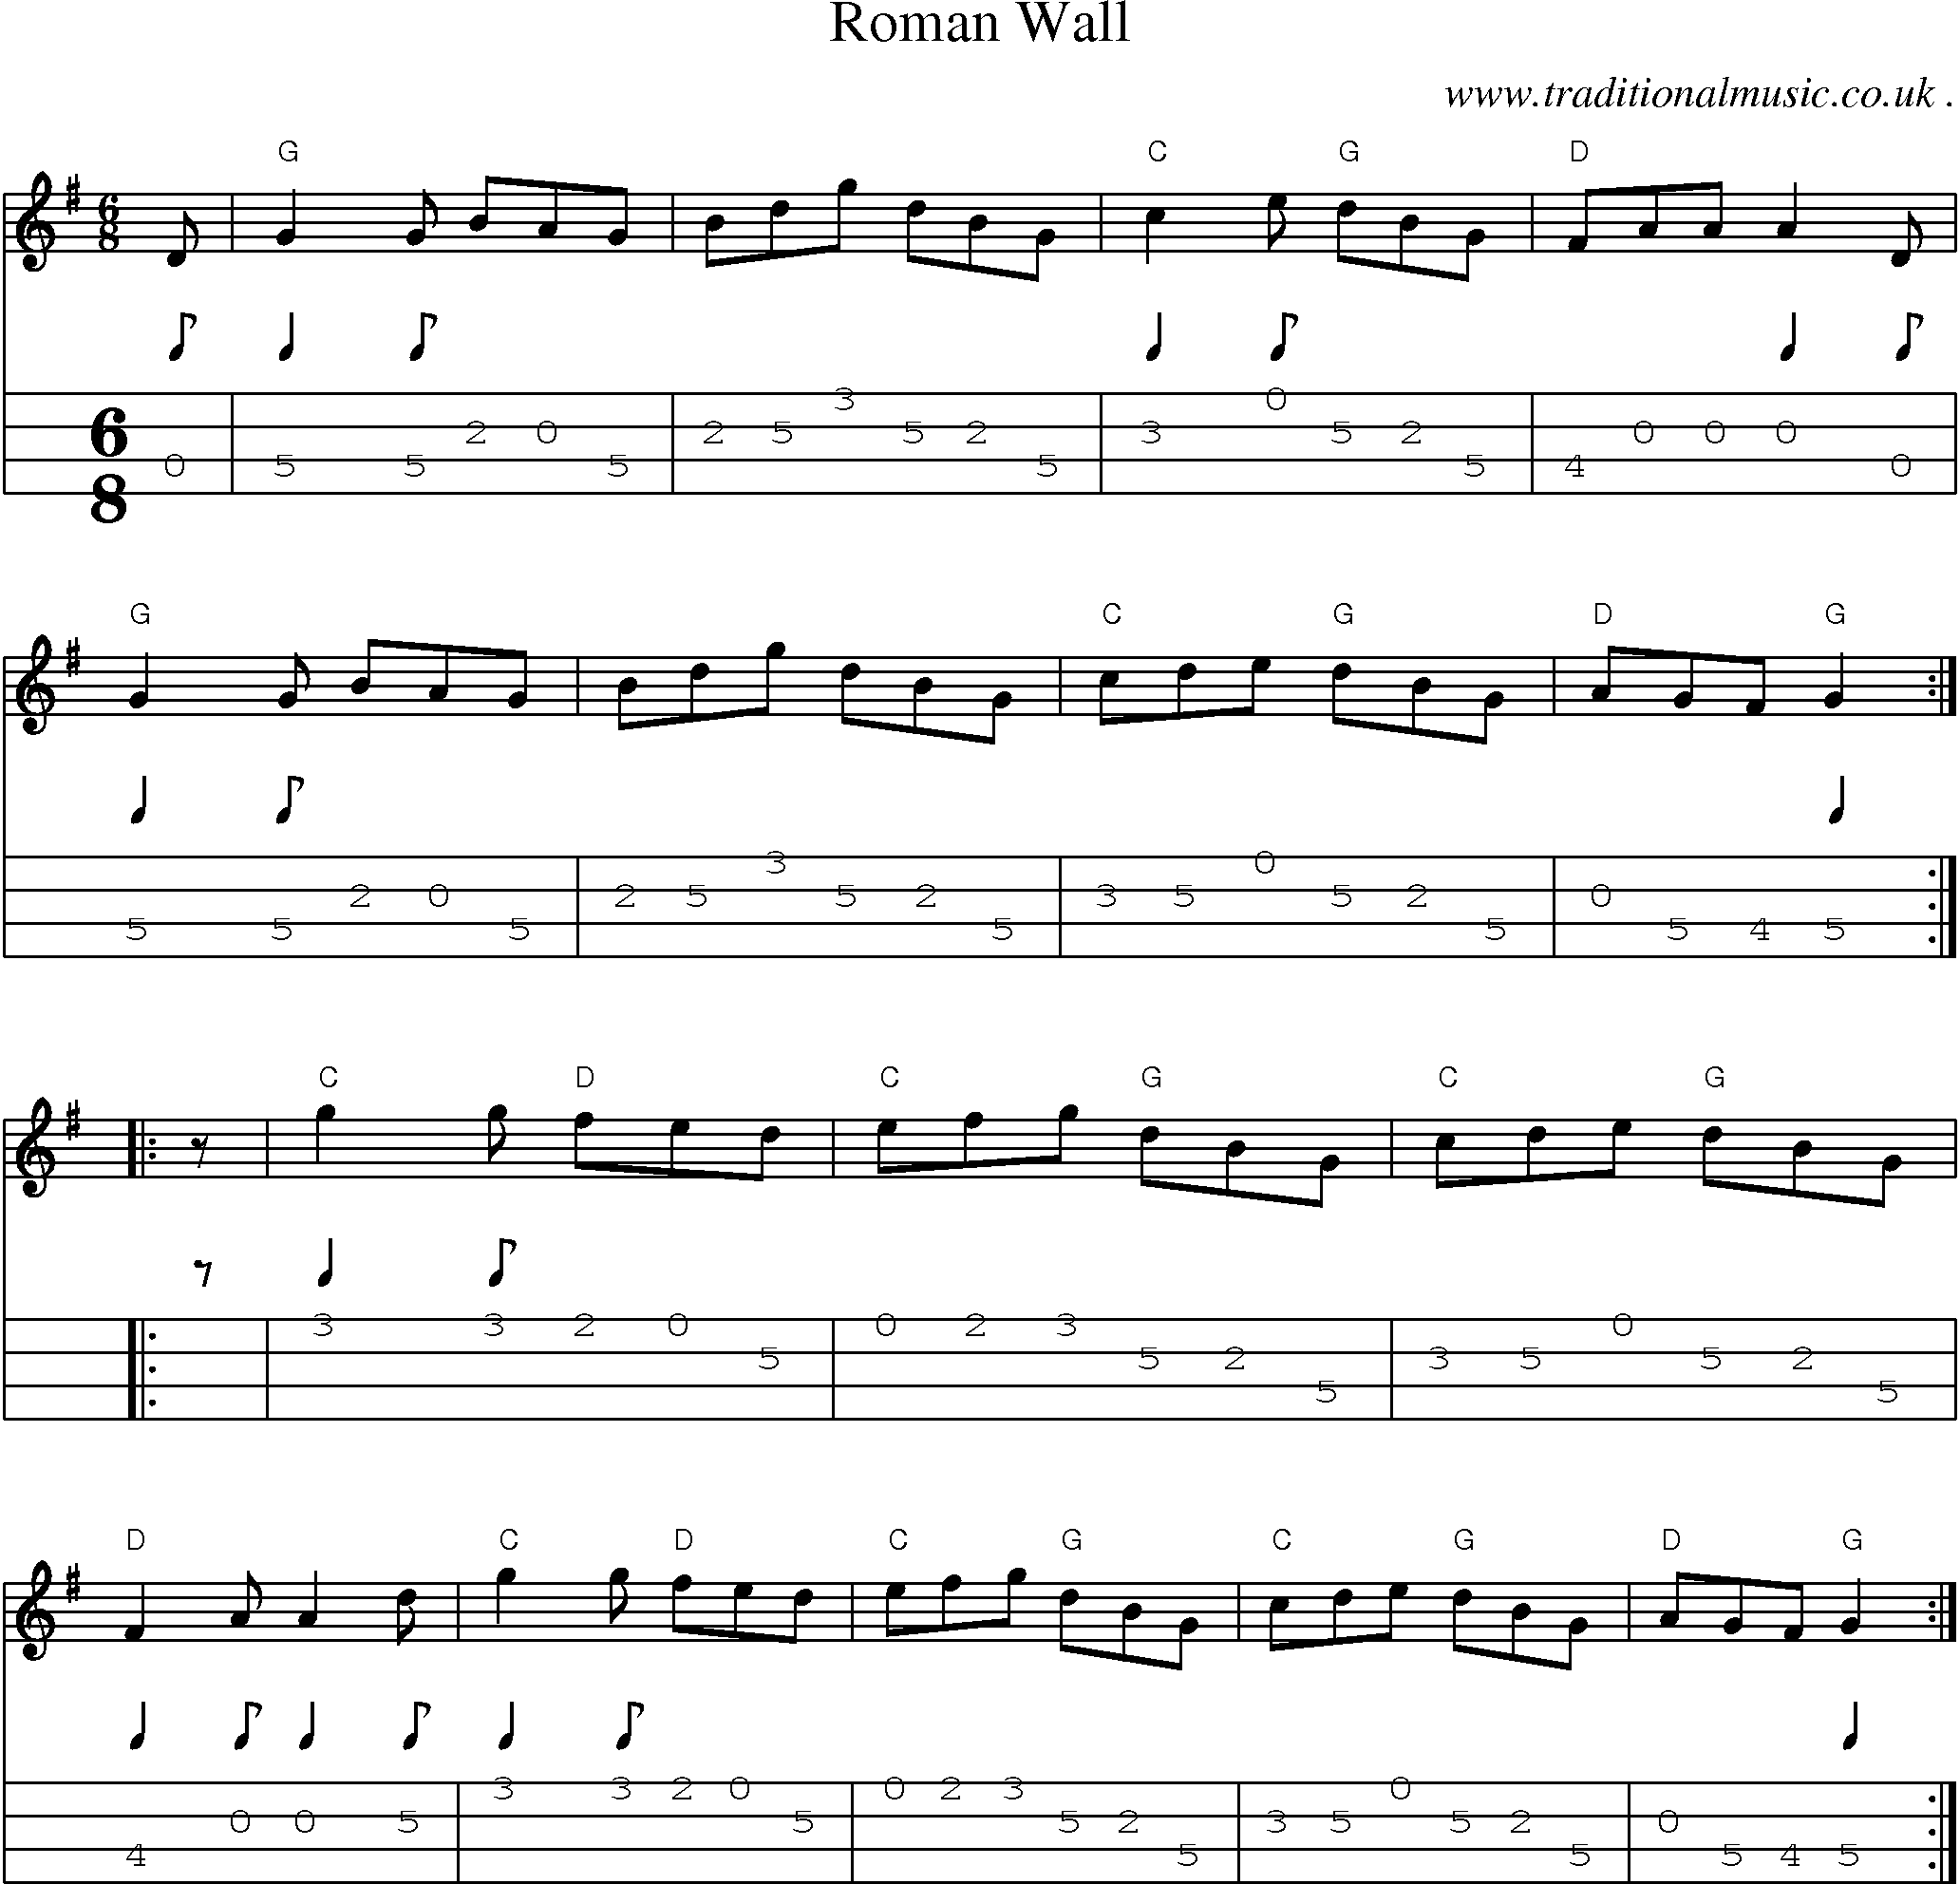 Music Score and Guitar Tabs for Roman Wall